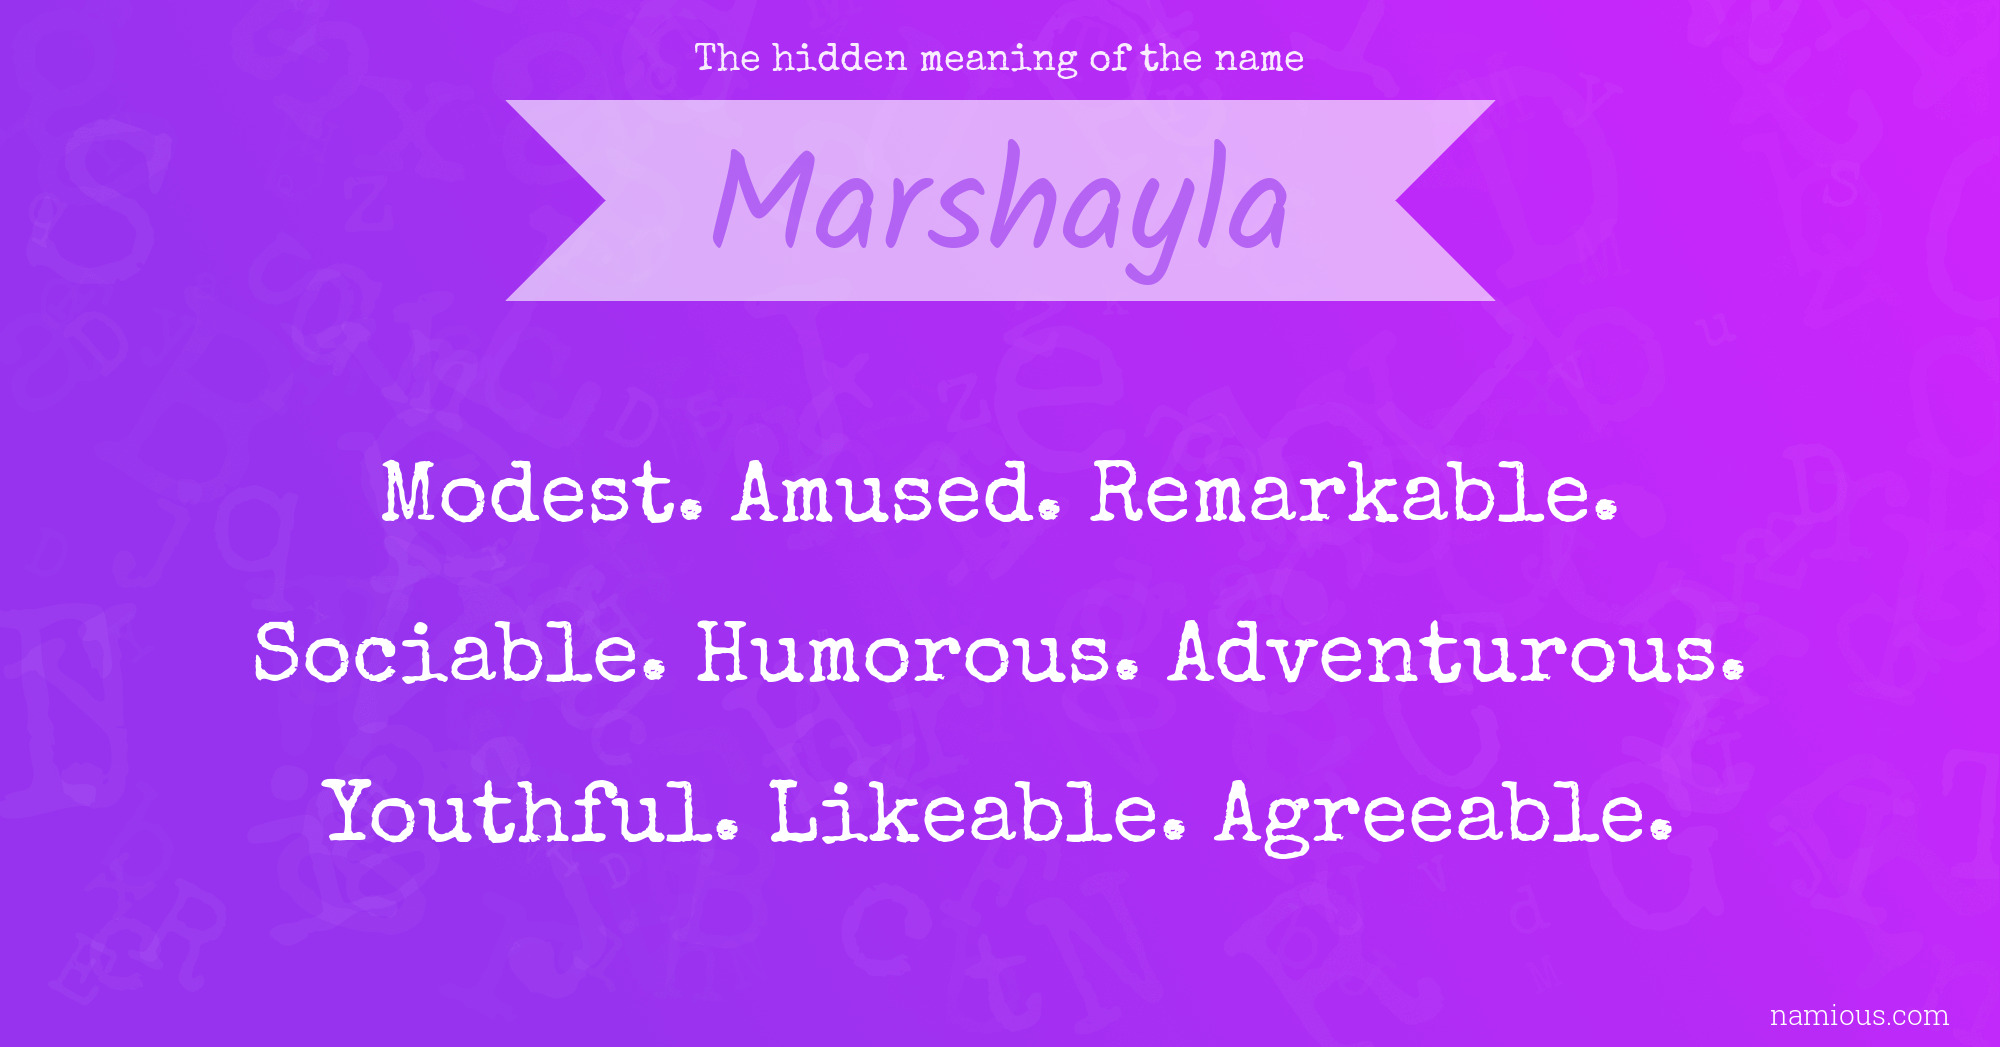 The hidden meaning of the name Marshayla